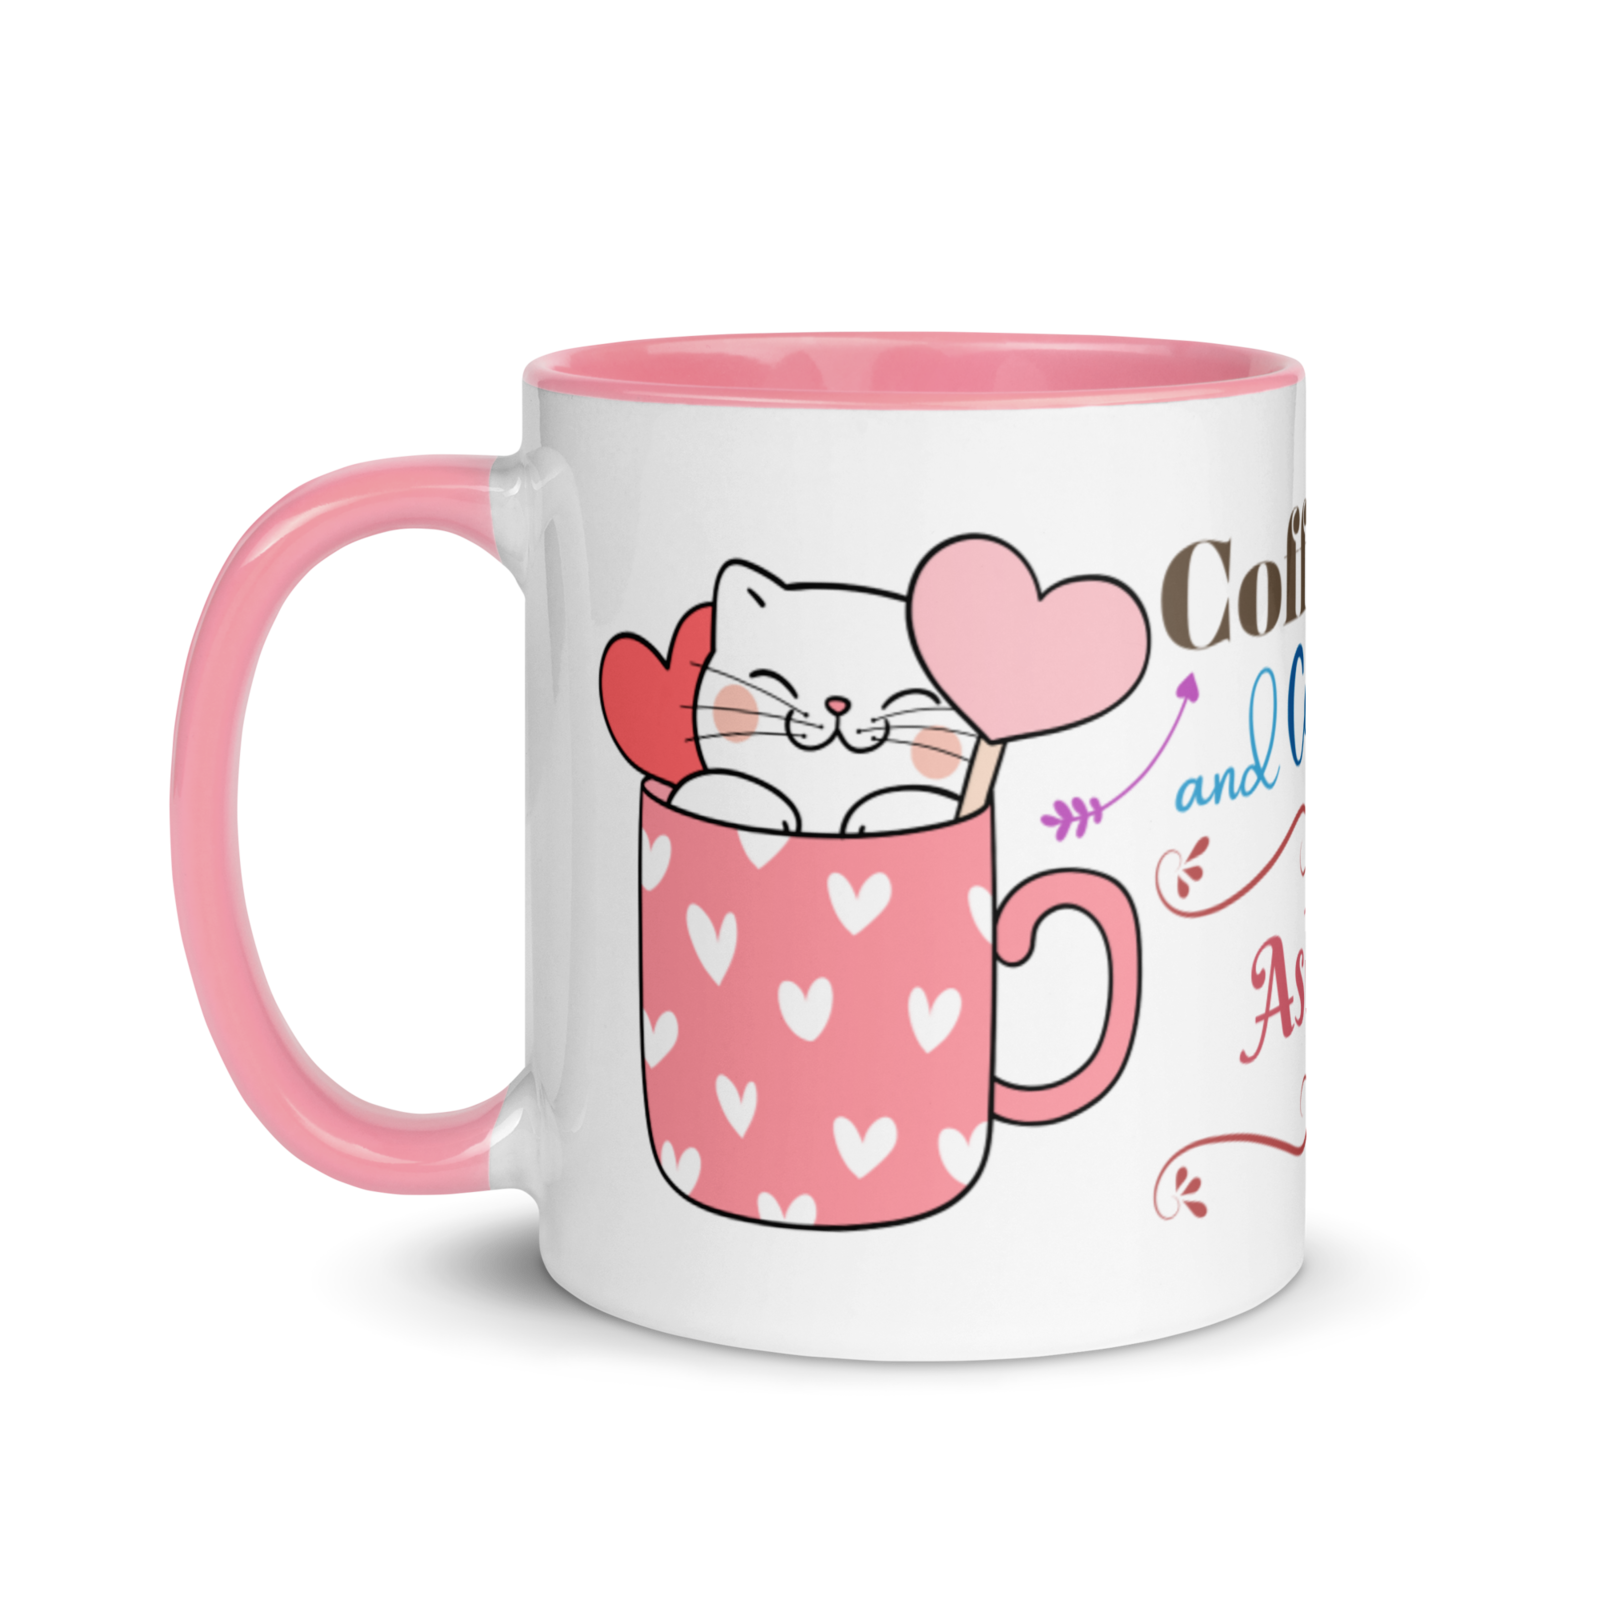 Primary image for Personalized Coffee Mug 11oz | Add Your Name to Adorable Coffee and Cats